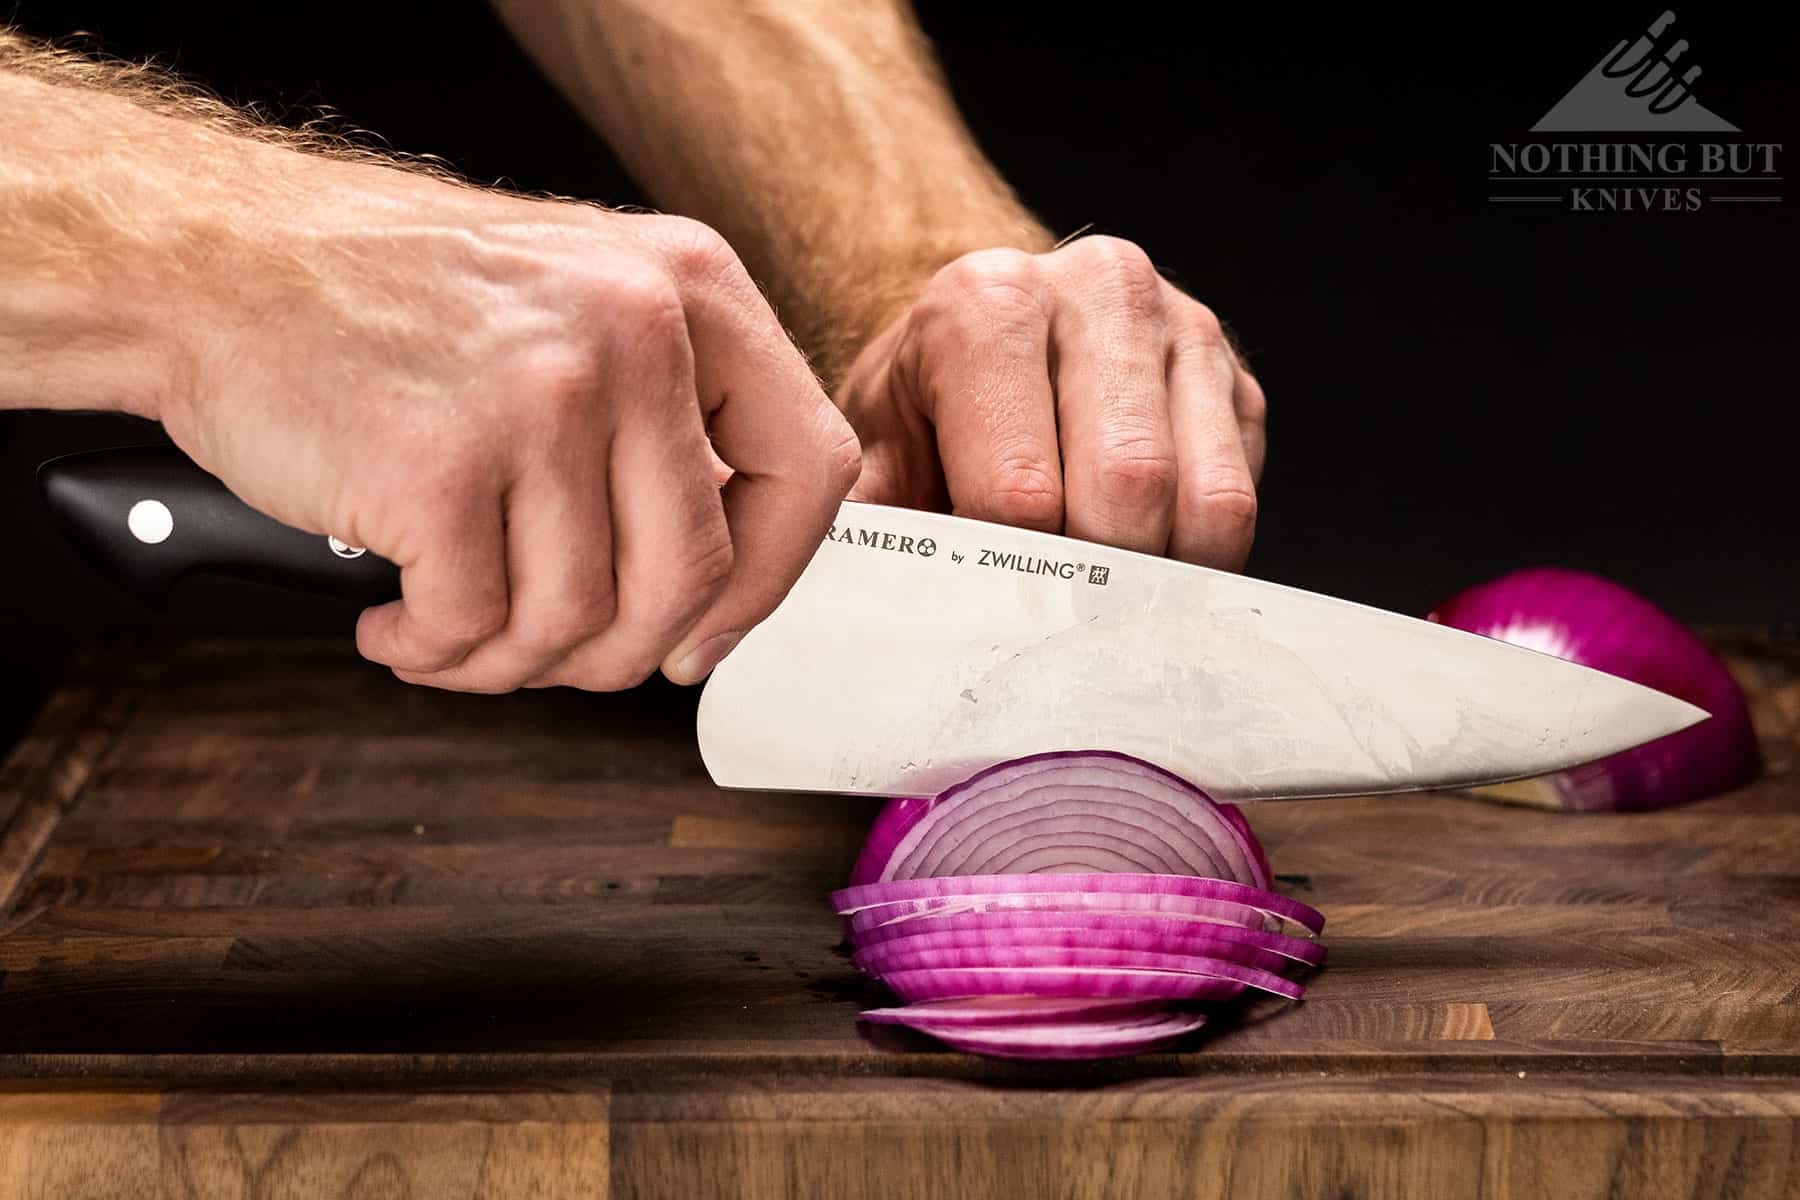 https://www.nothingbutknives.com/wp-content/uploads/2022/03/Onion-Slicing-With-The-Kramer-By-Zwilling-Euro-Essential-Knife.jpg